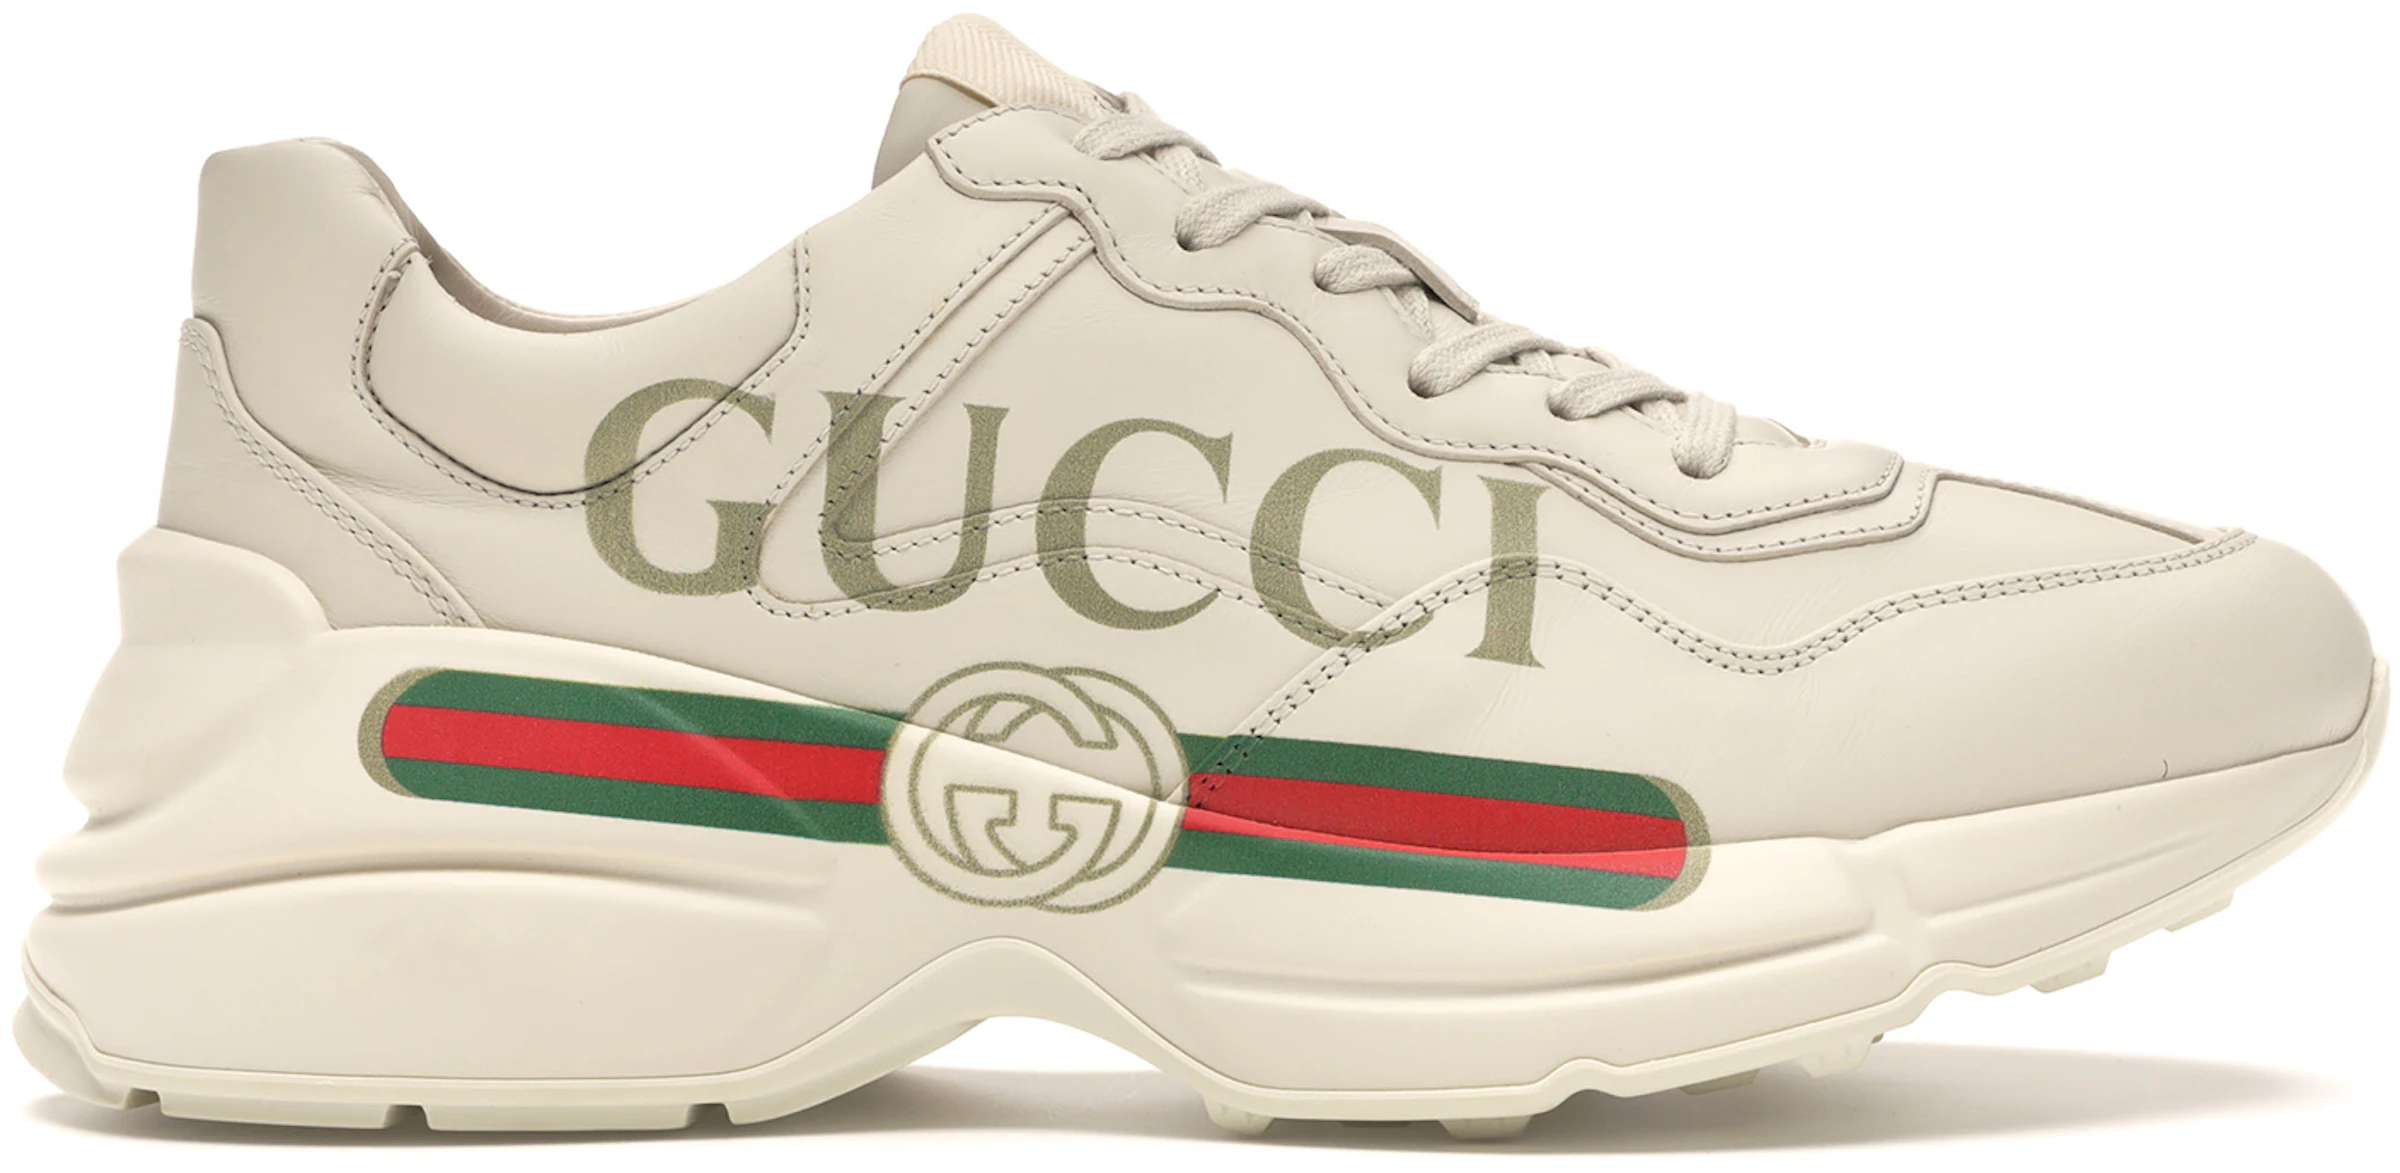 Buy Gucci Shoes, Slides, Sneakers and Sandals